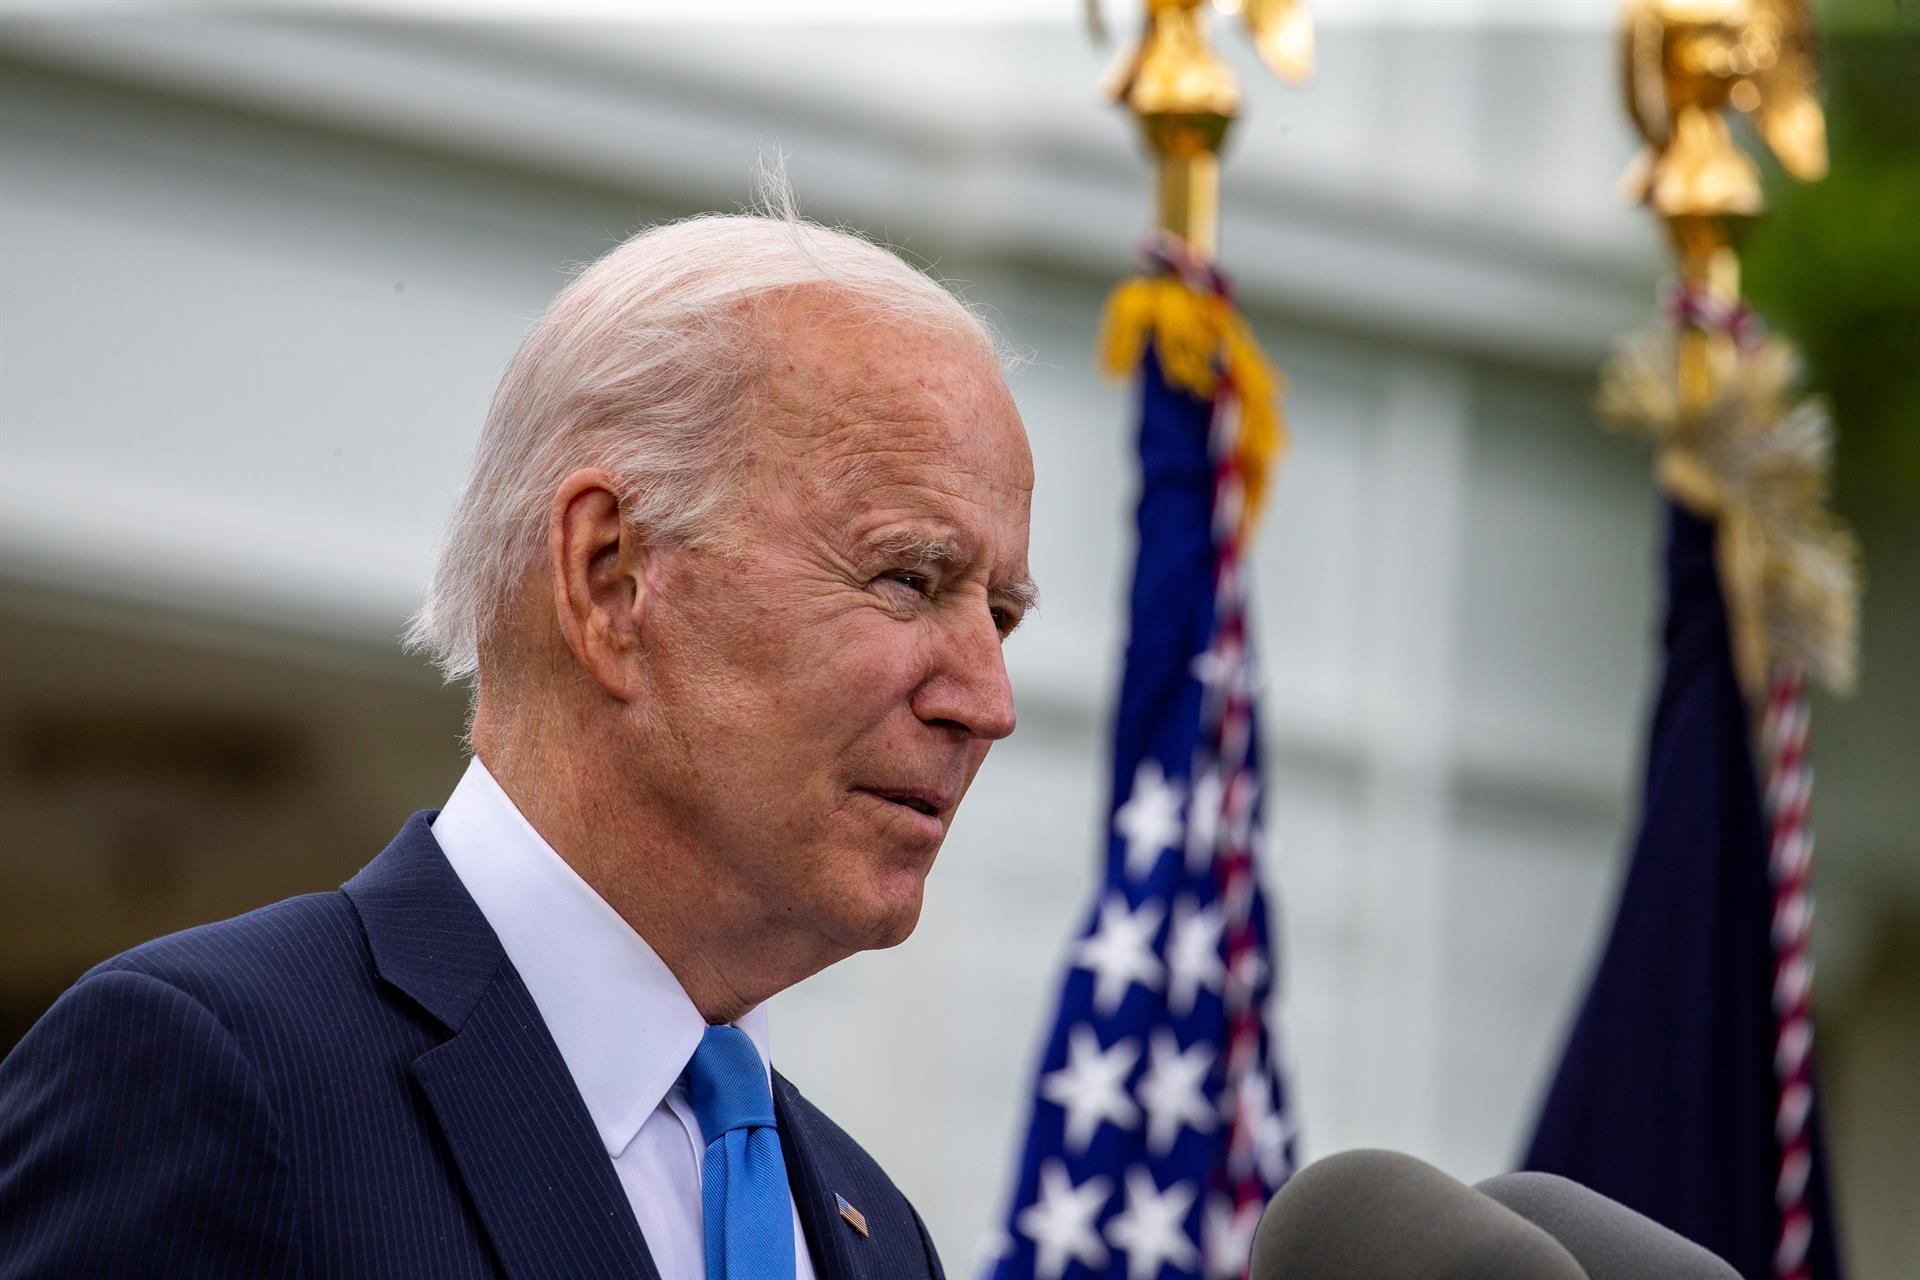 US President Joe Biden speaking during a news conference at the White House